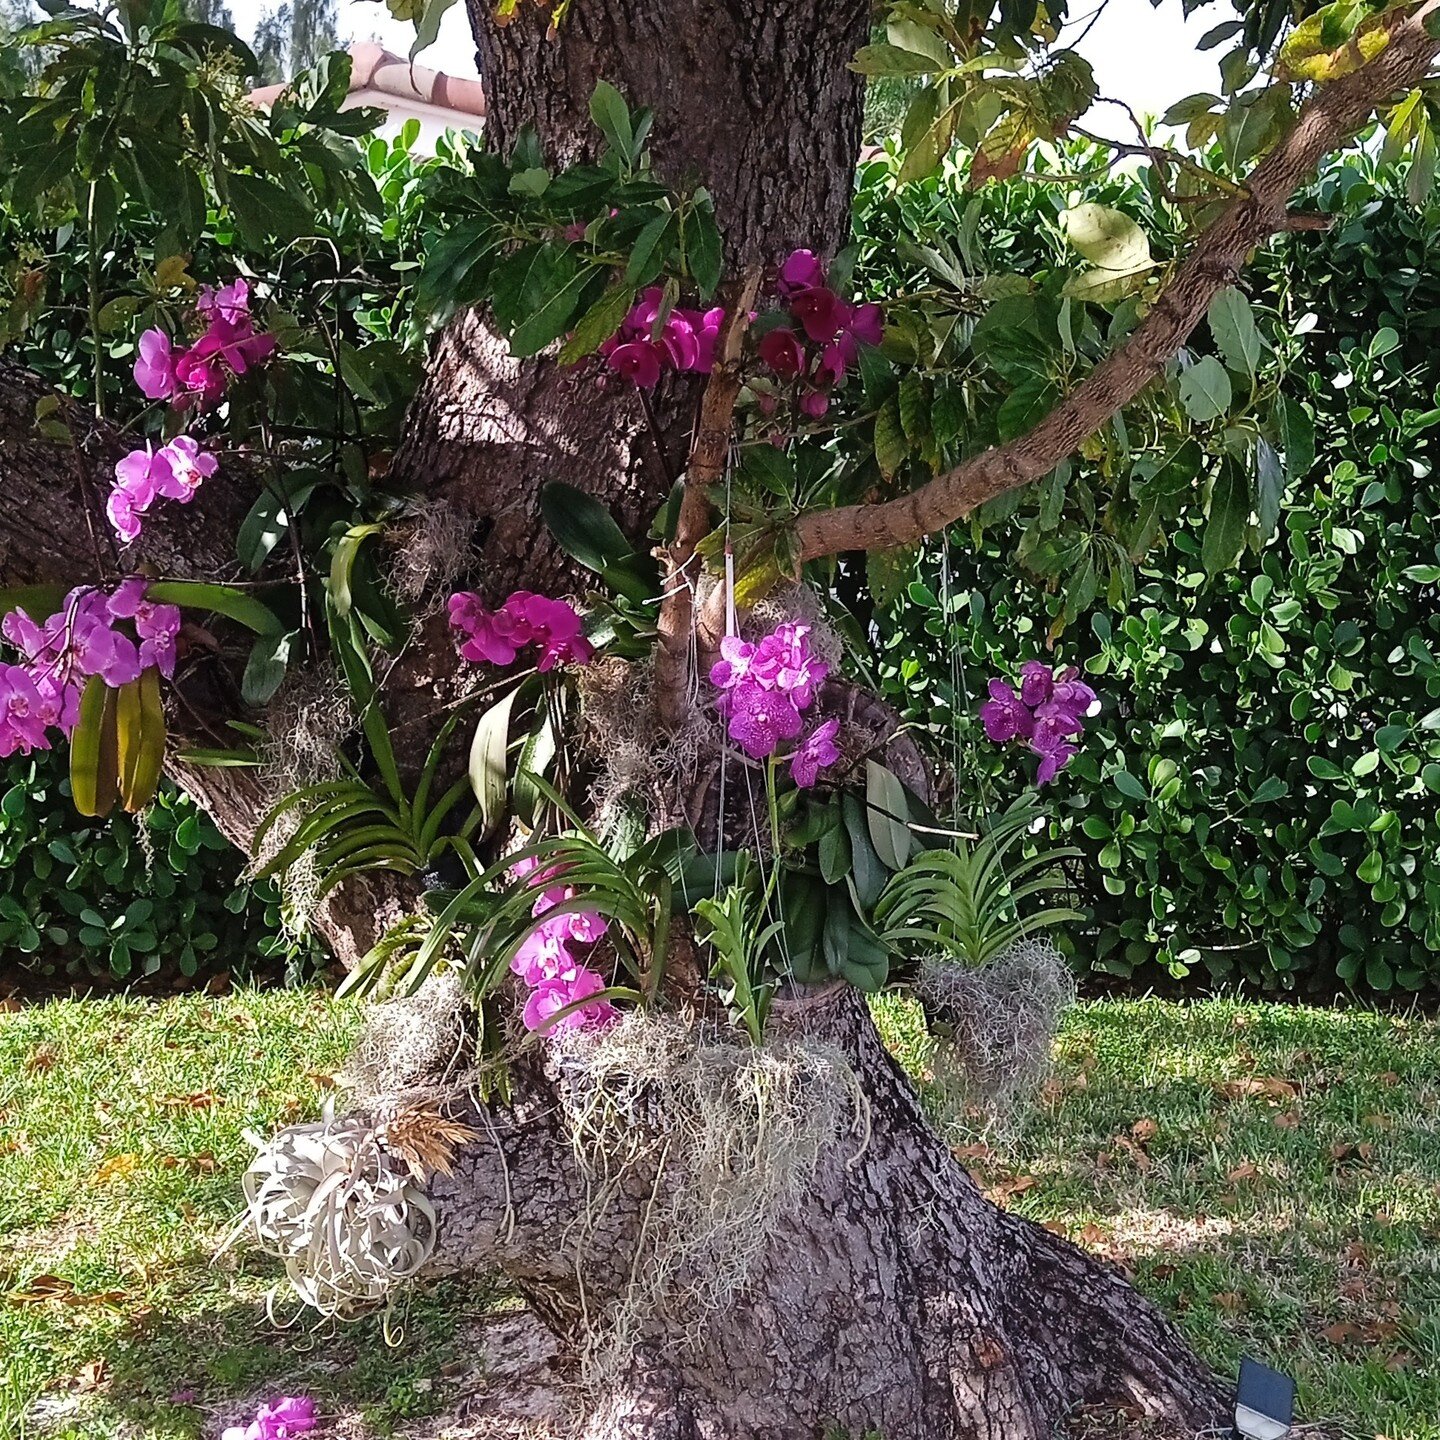 Wonderfull orchids tied on trees! To renew your spirit when you get at home after a hard and long day!